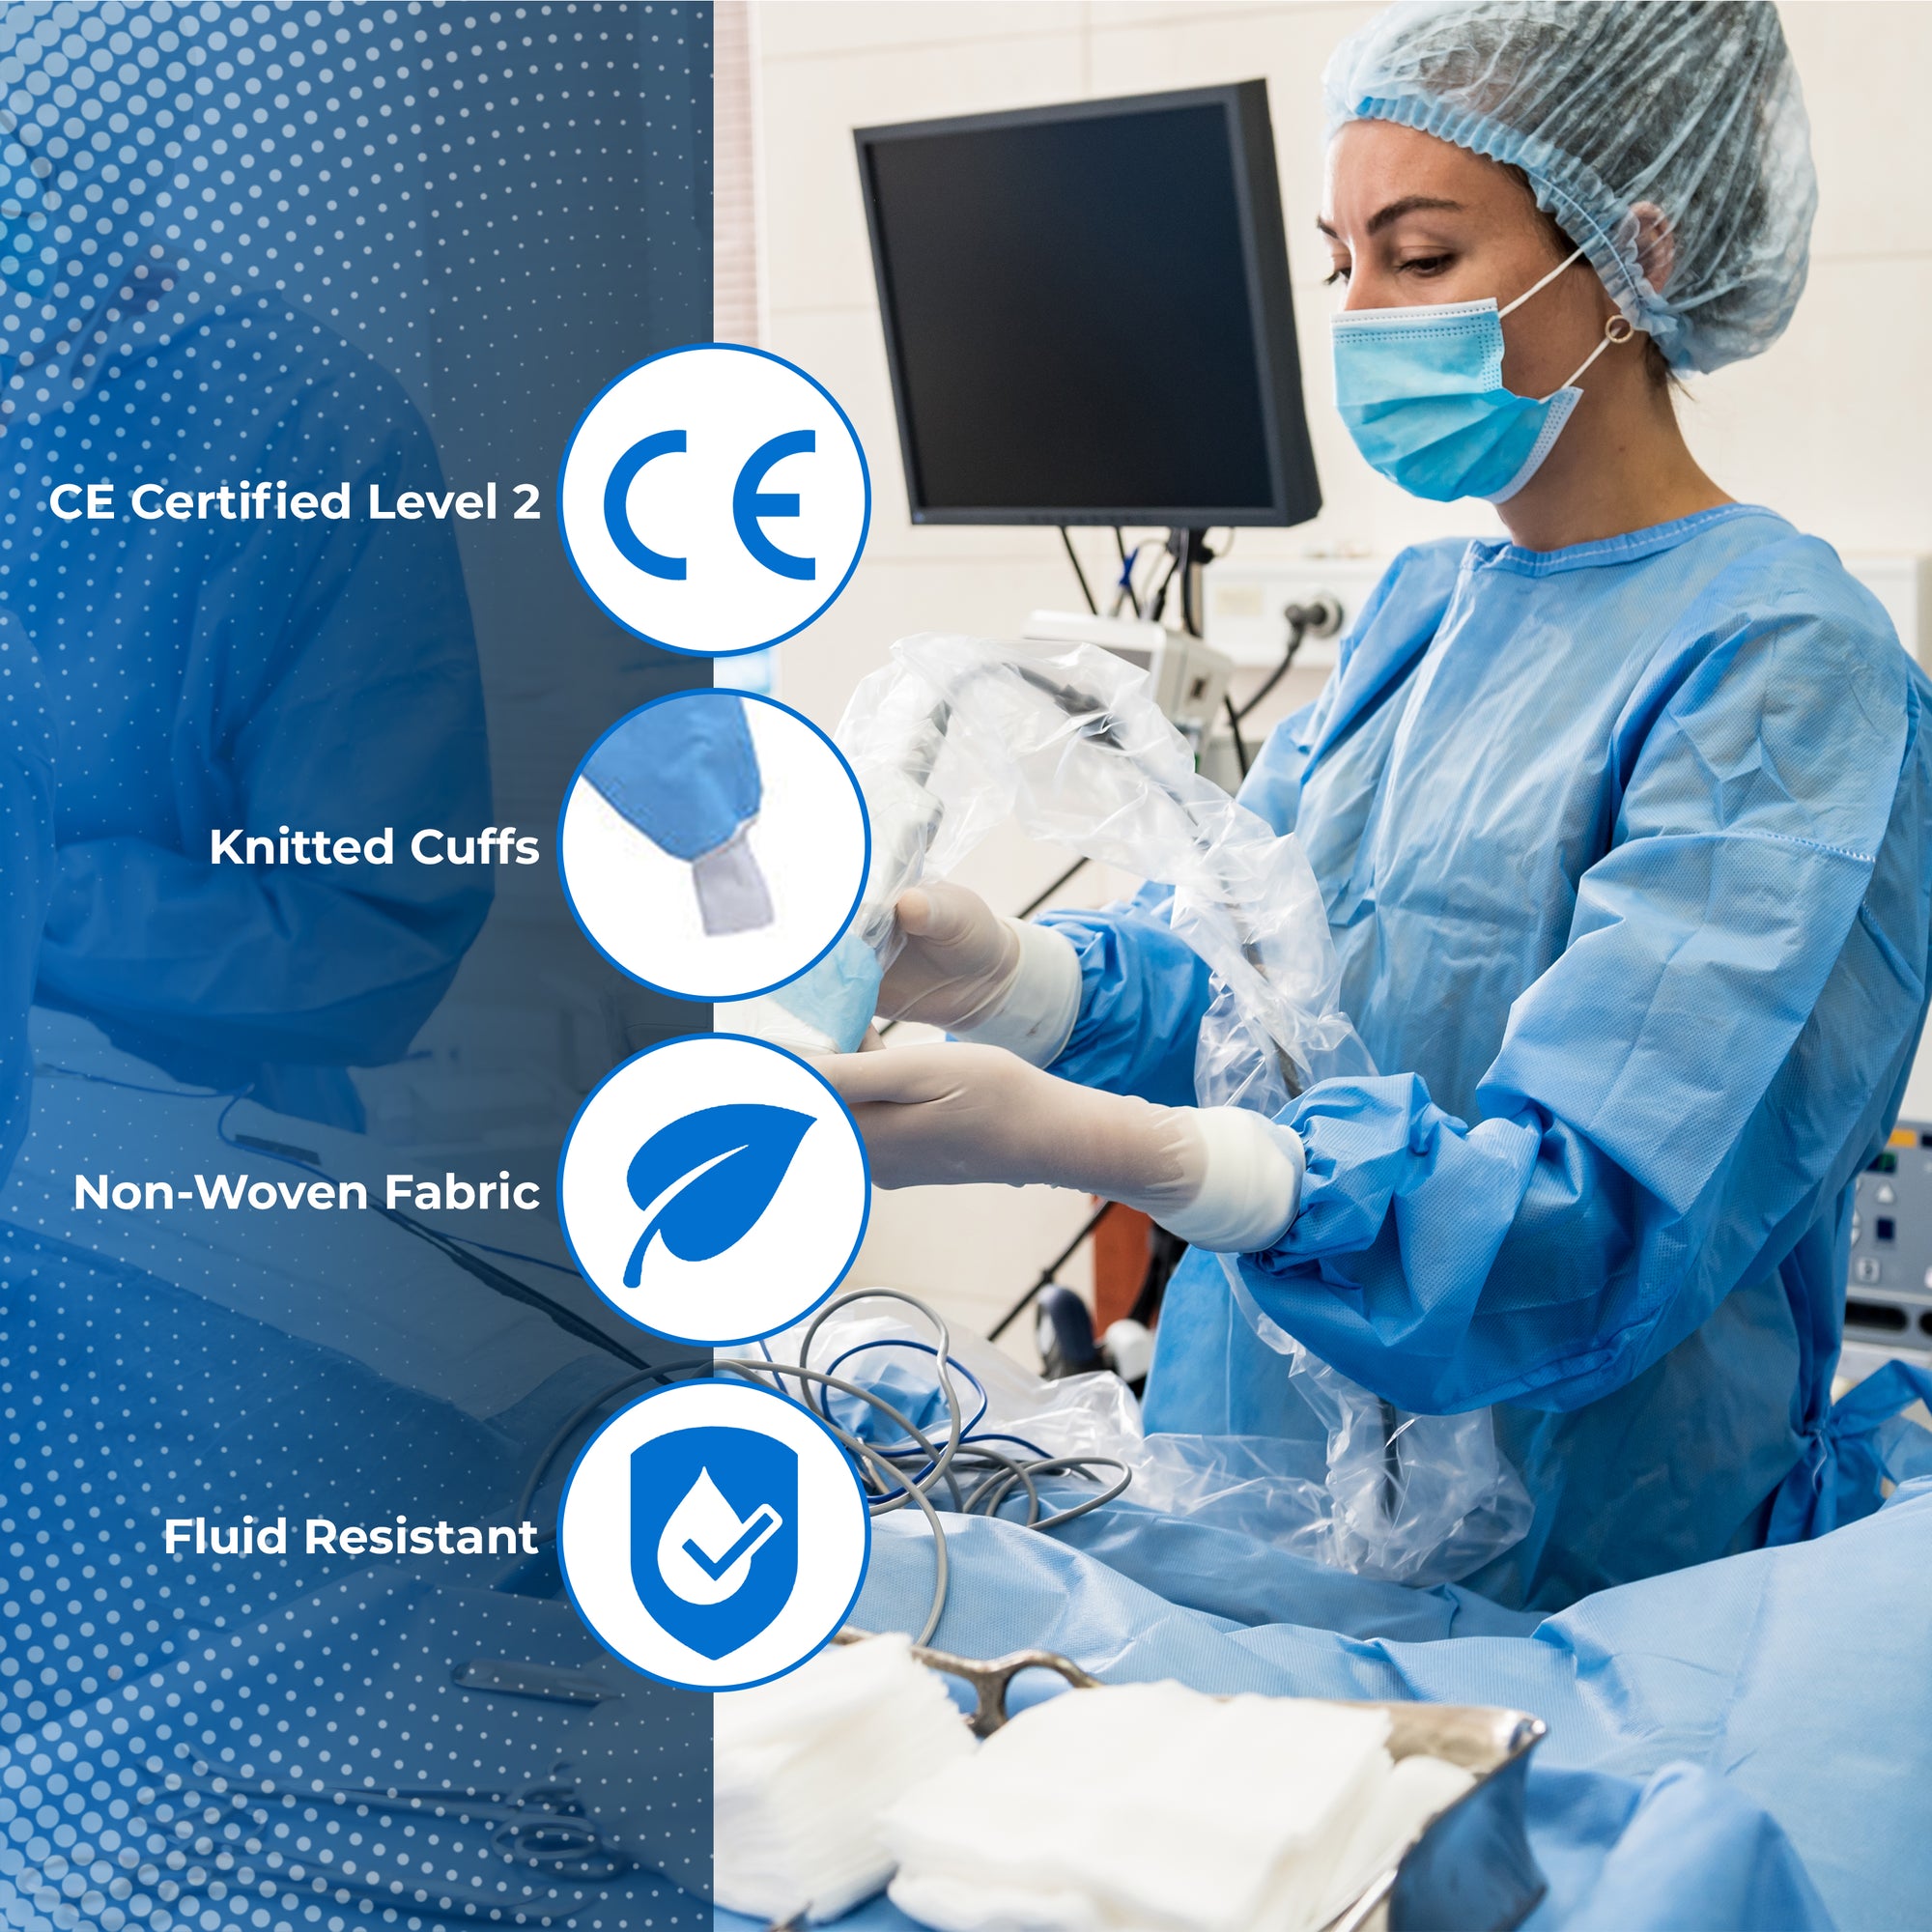 Disposable Isolation Gowns with Thumb Loops and Double Back Ties, Fluid Resistant, Level 2 and Level 3, CPE